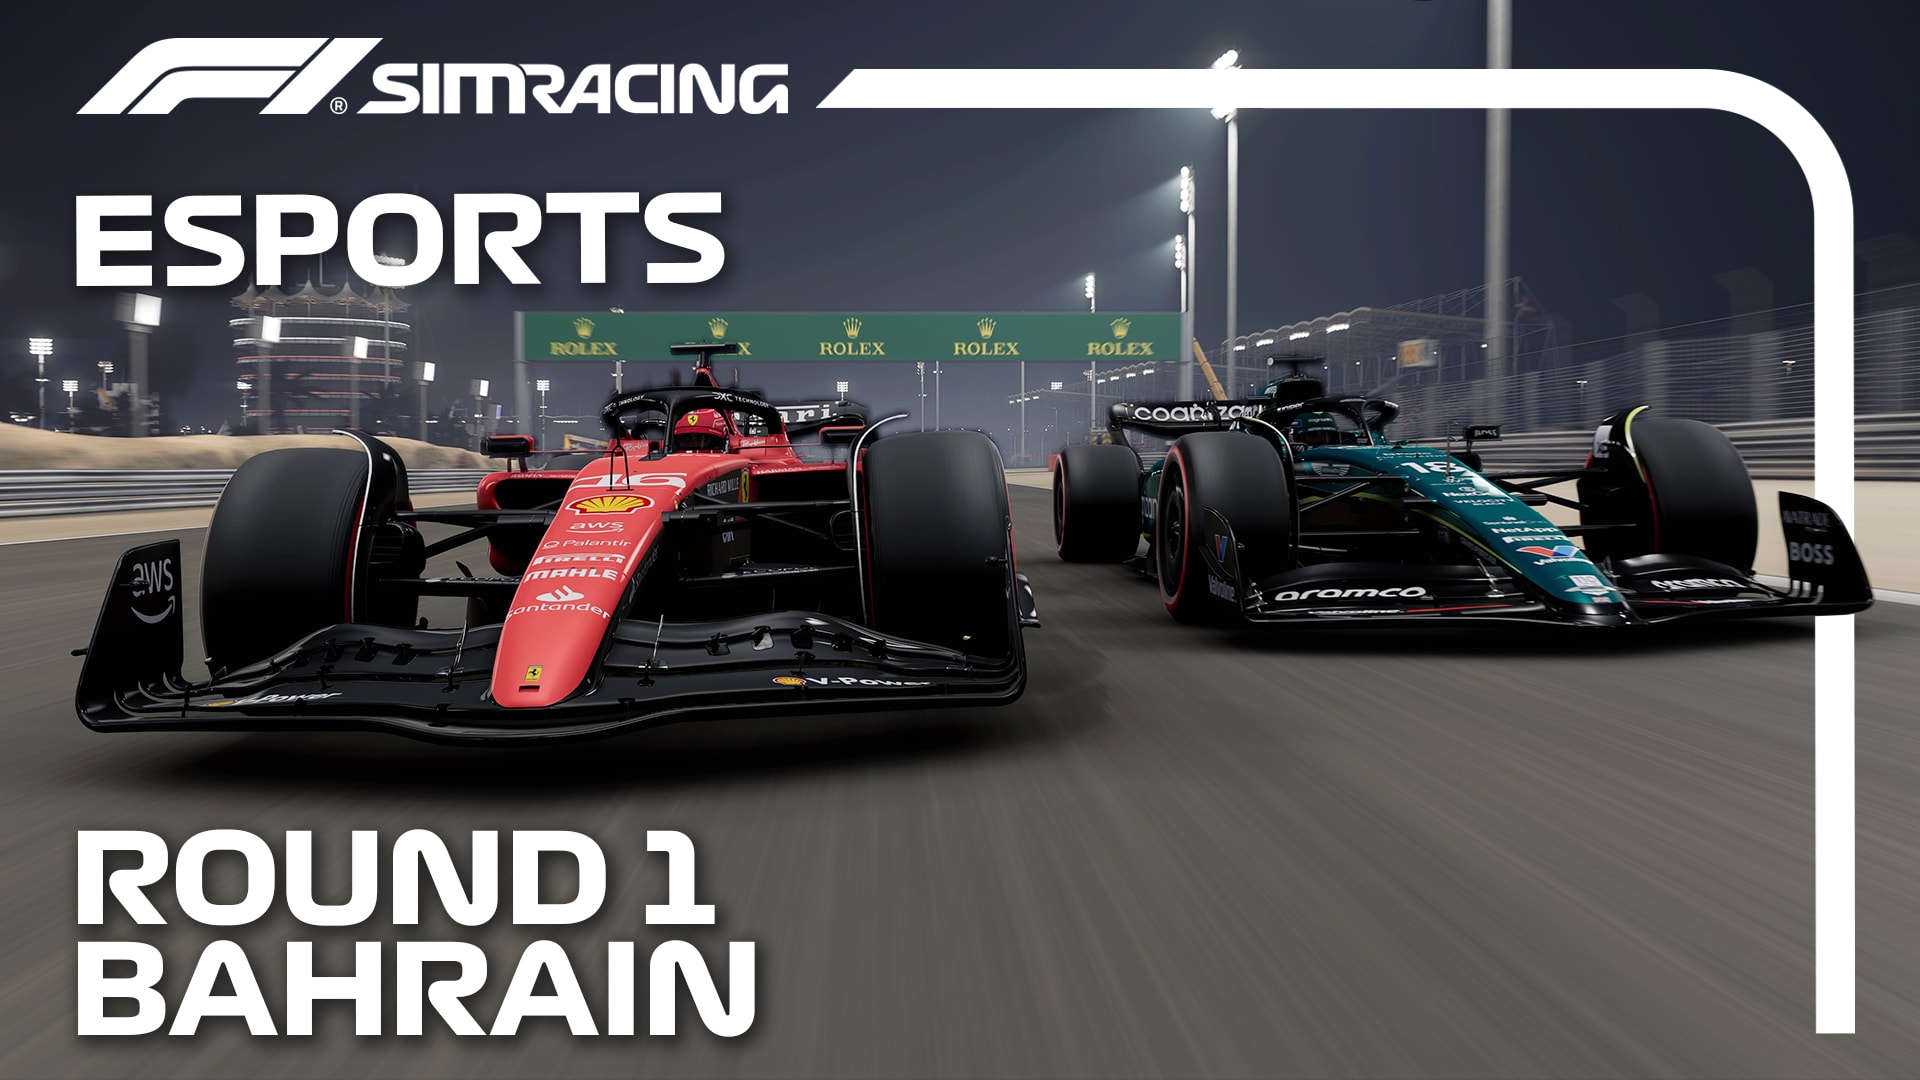 LIVESTREAM Watch the action from Round 1 of the F1 Sim Racing World Championship Formula 1®